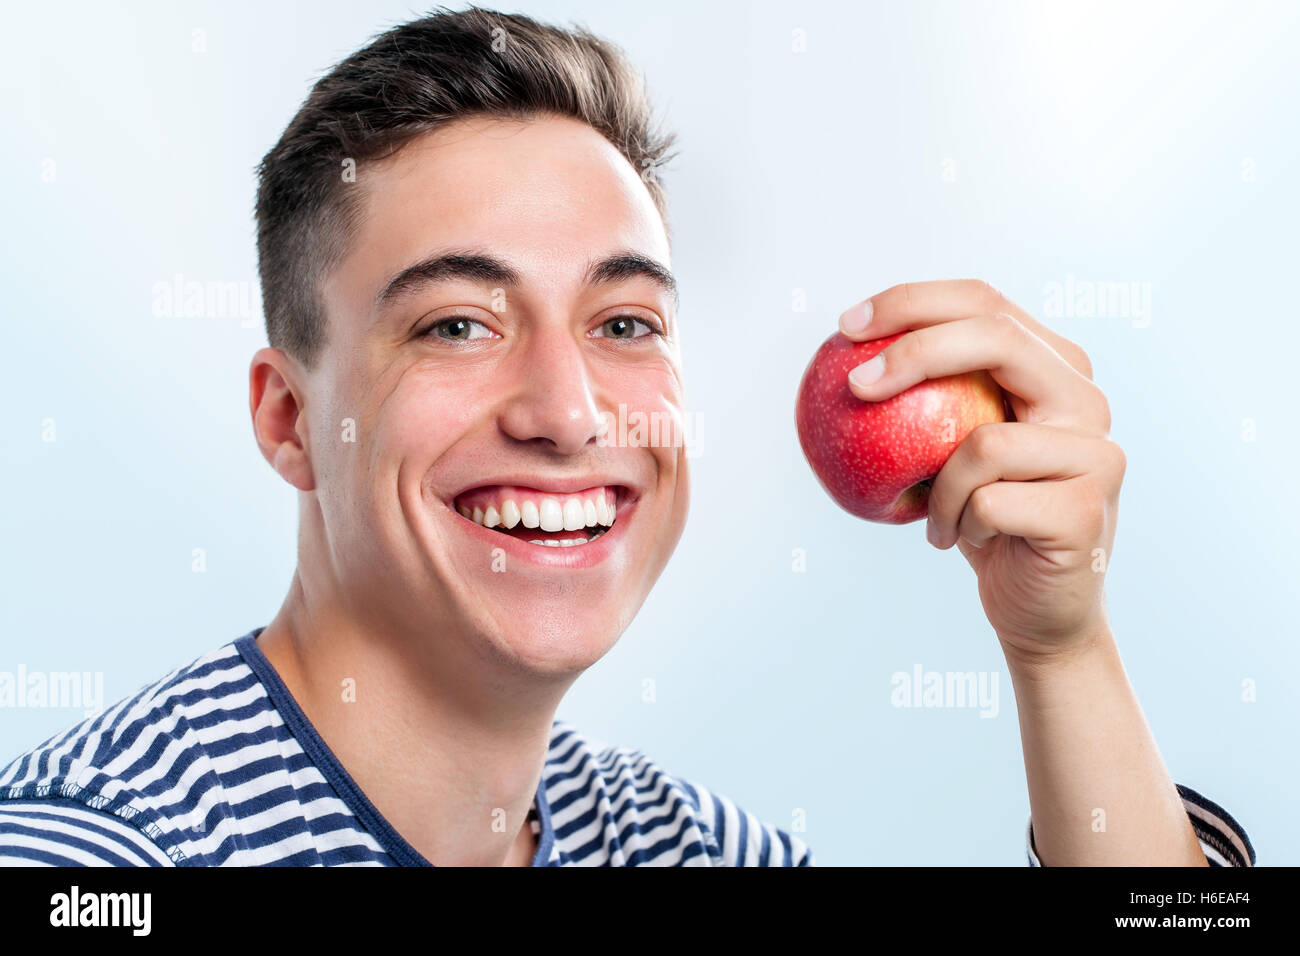 Extreme close up of Handsome young teen holding red apple and showing ...